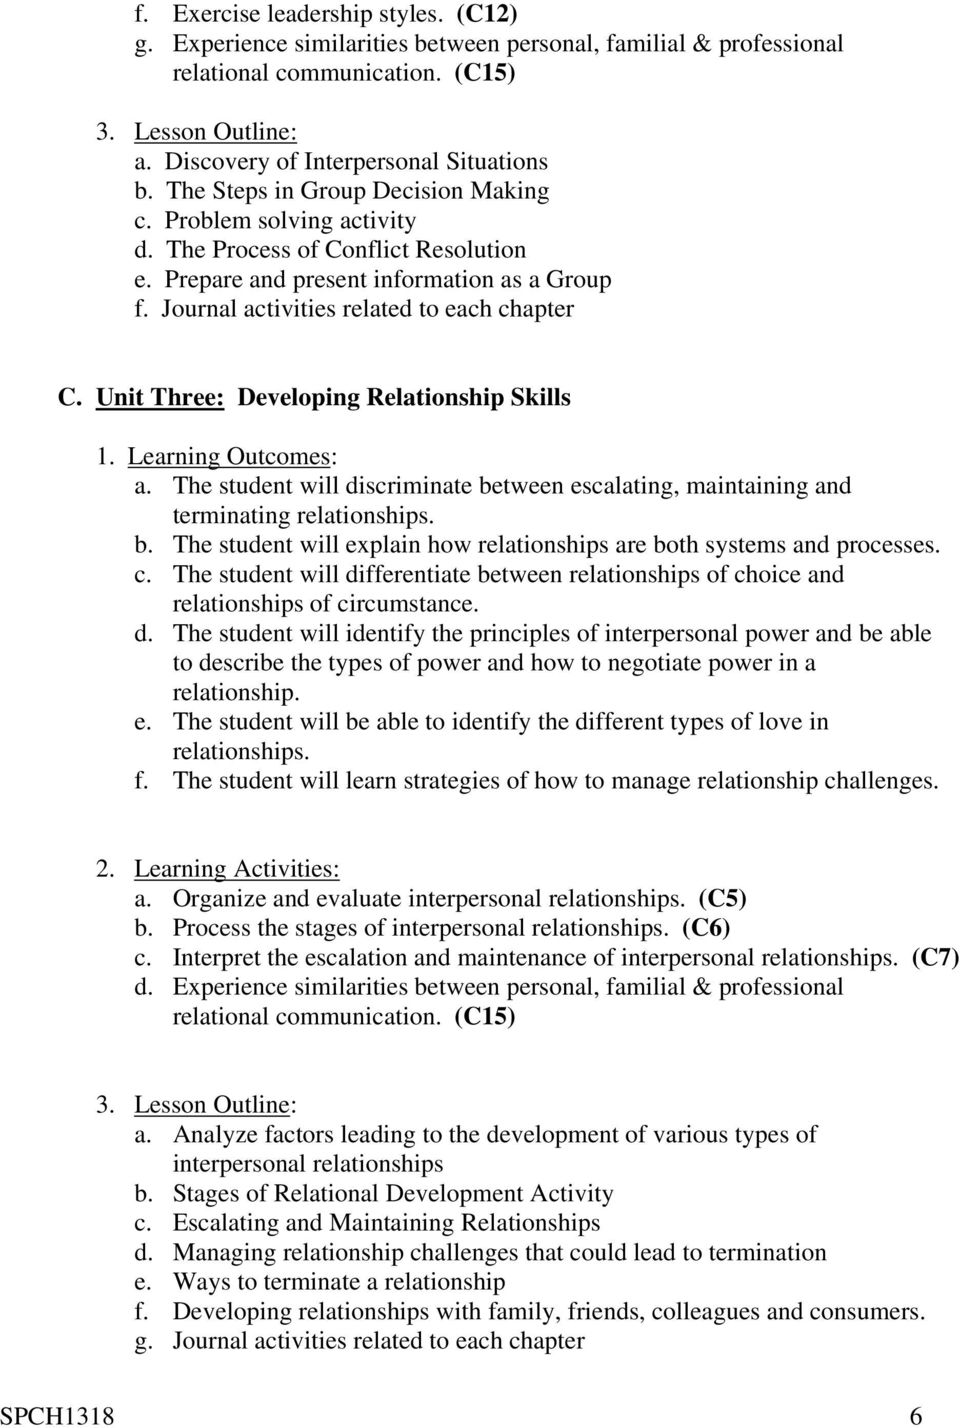 Unit Three: Developing Relationship Skills 1. Learning Outcomes: a. The student will discriminate between escalating, maintaining and terminating relationships. b. The student will explain how relationships are both systems and processes.